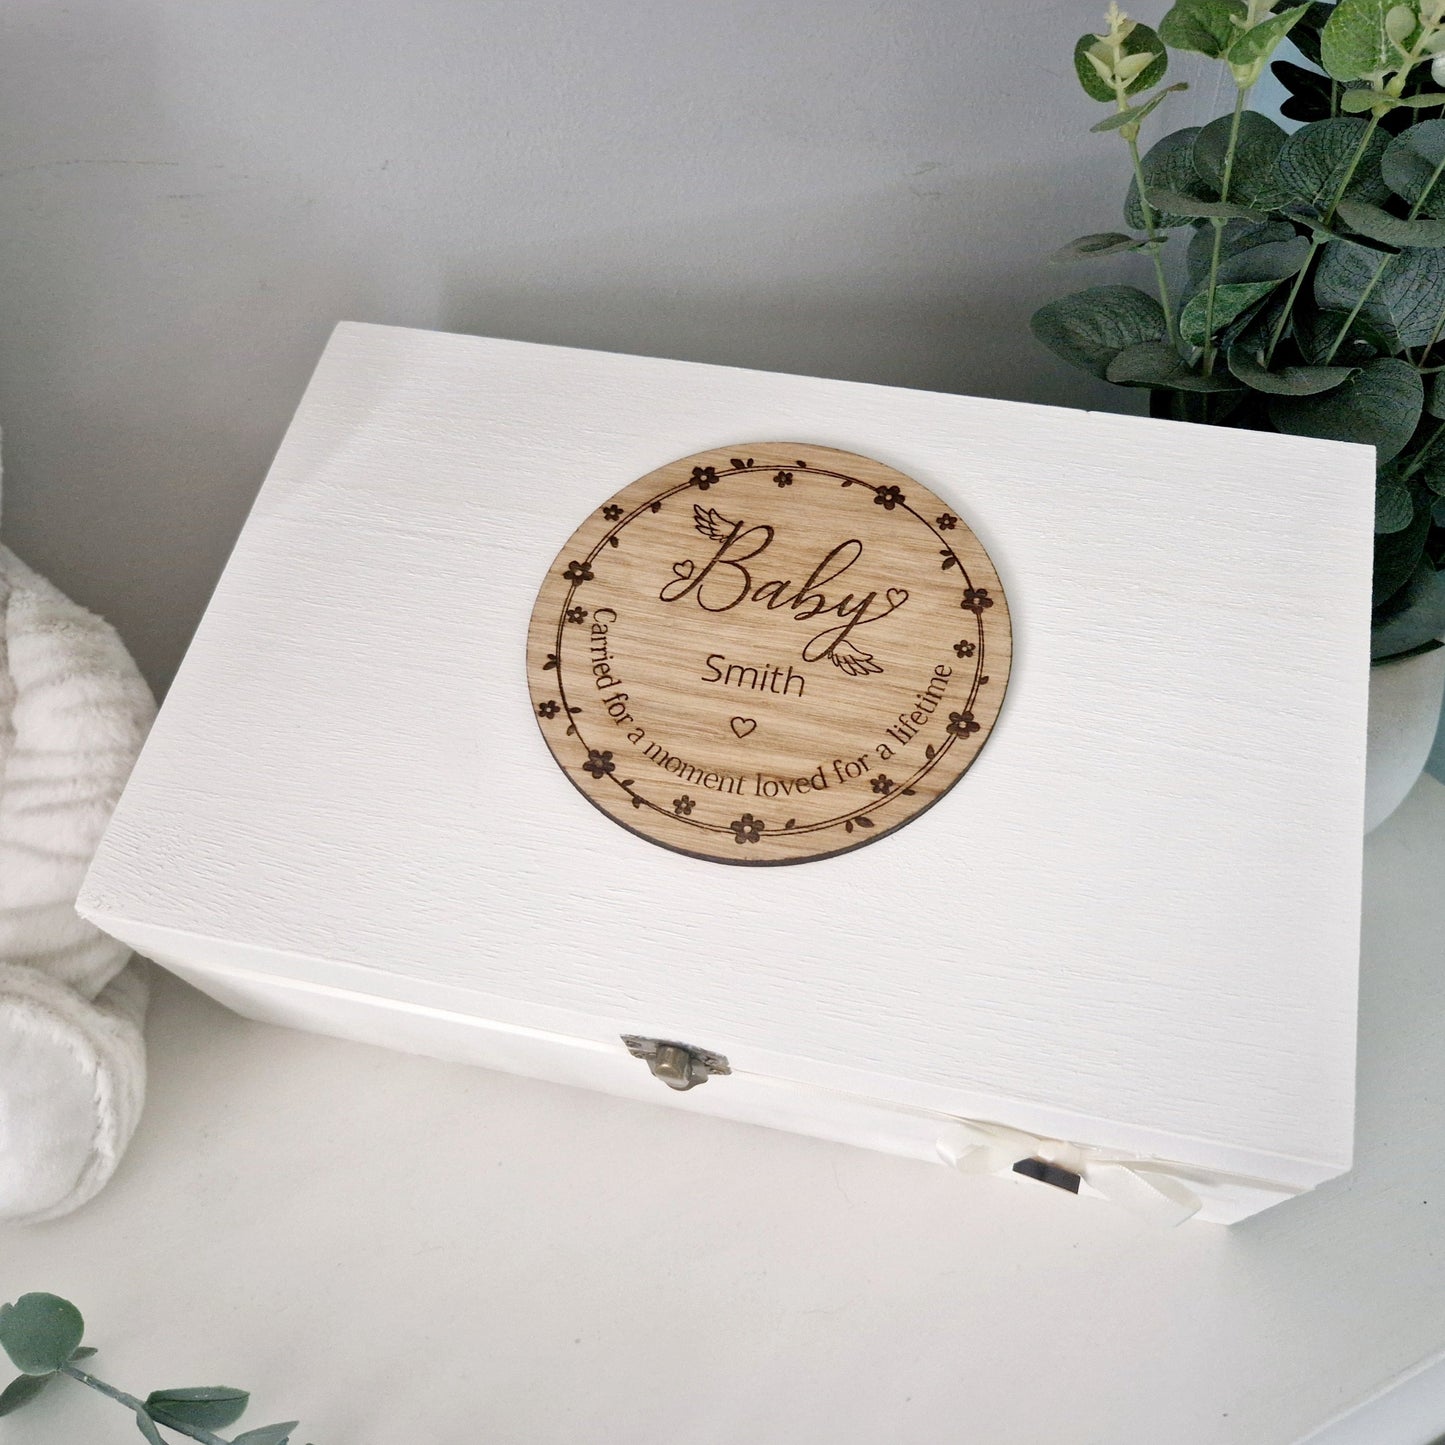 Baby Loss Memory Box. White wooden box with oak veneer topper with the words carried for a moment loved for a lifetime. Personalised to baby name.